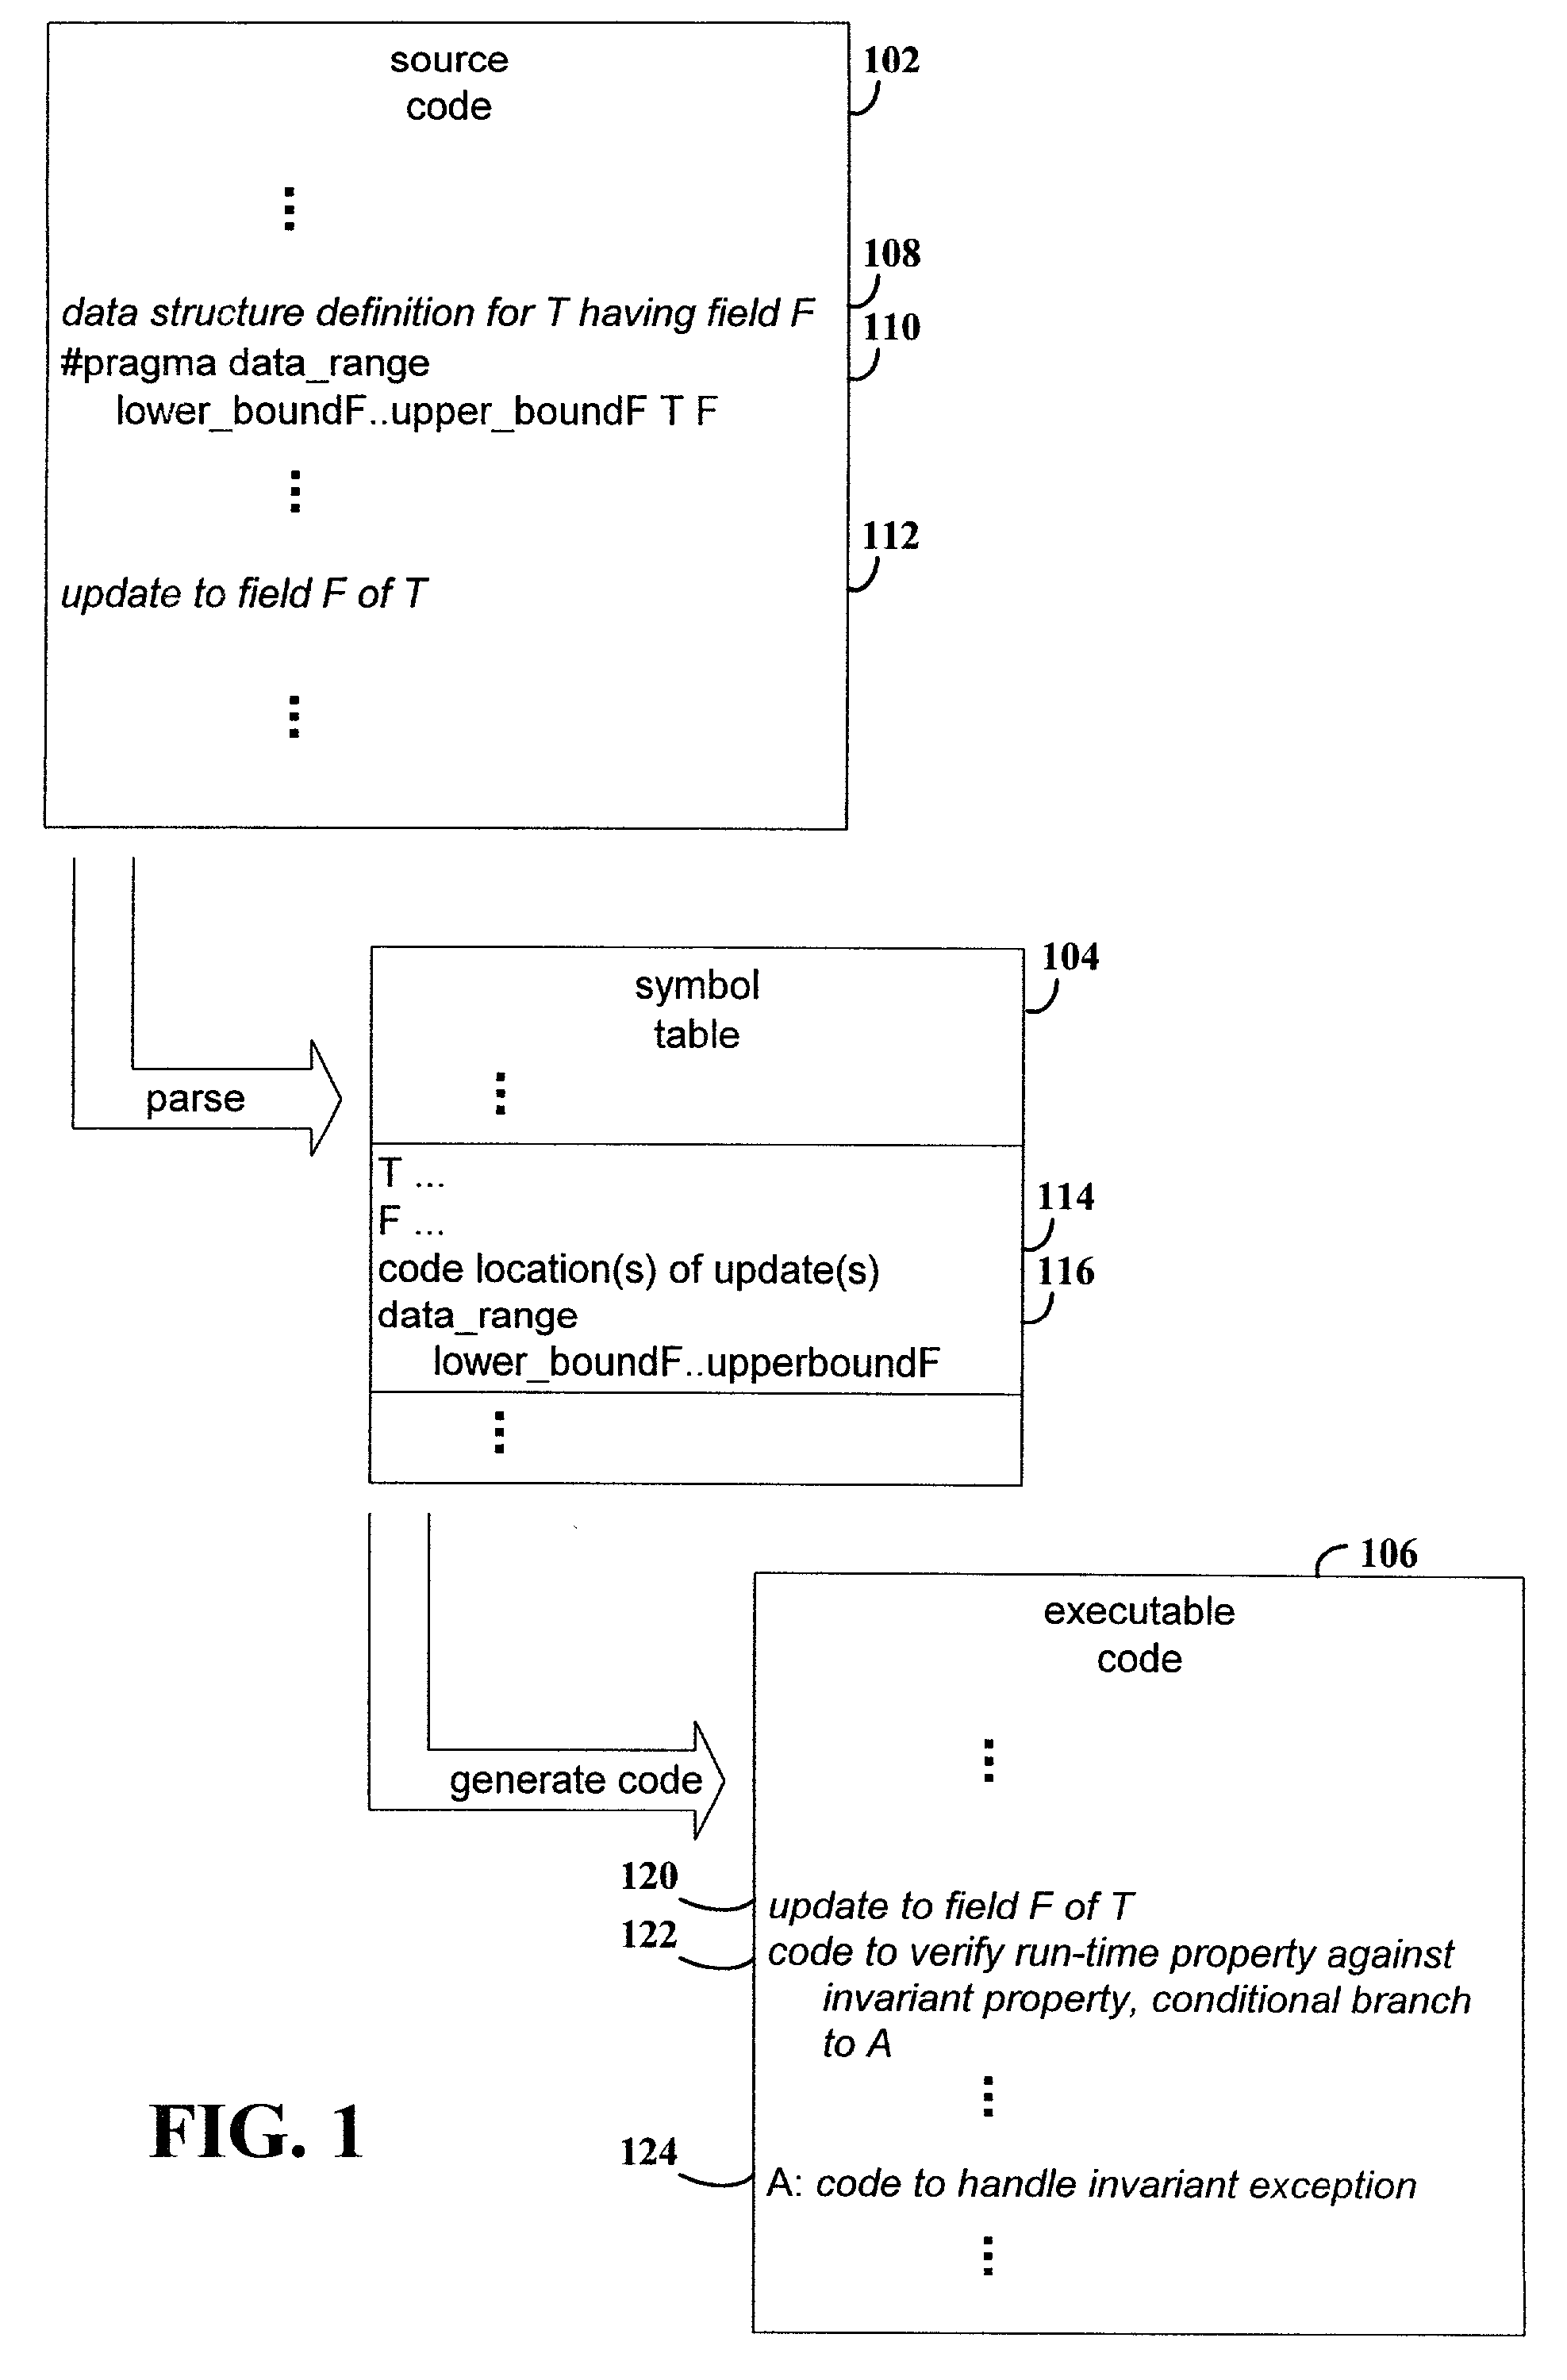 Specifying an invariant property (range of addresses) in the annotation in source code of the computer program